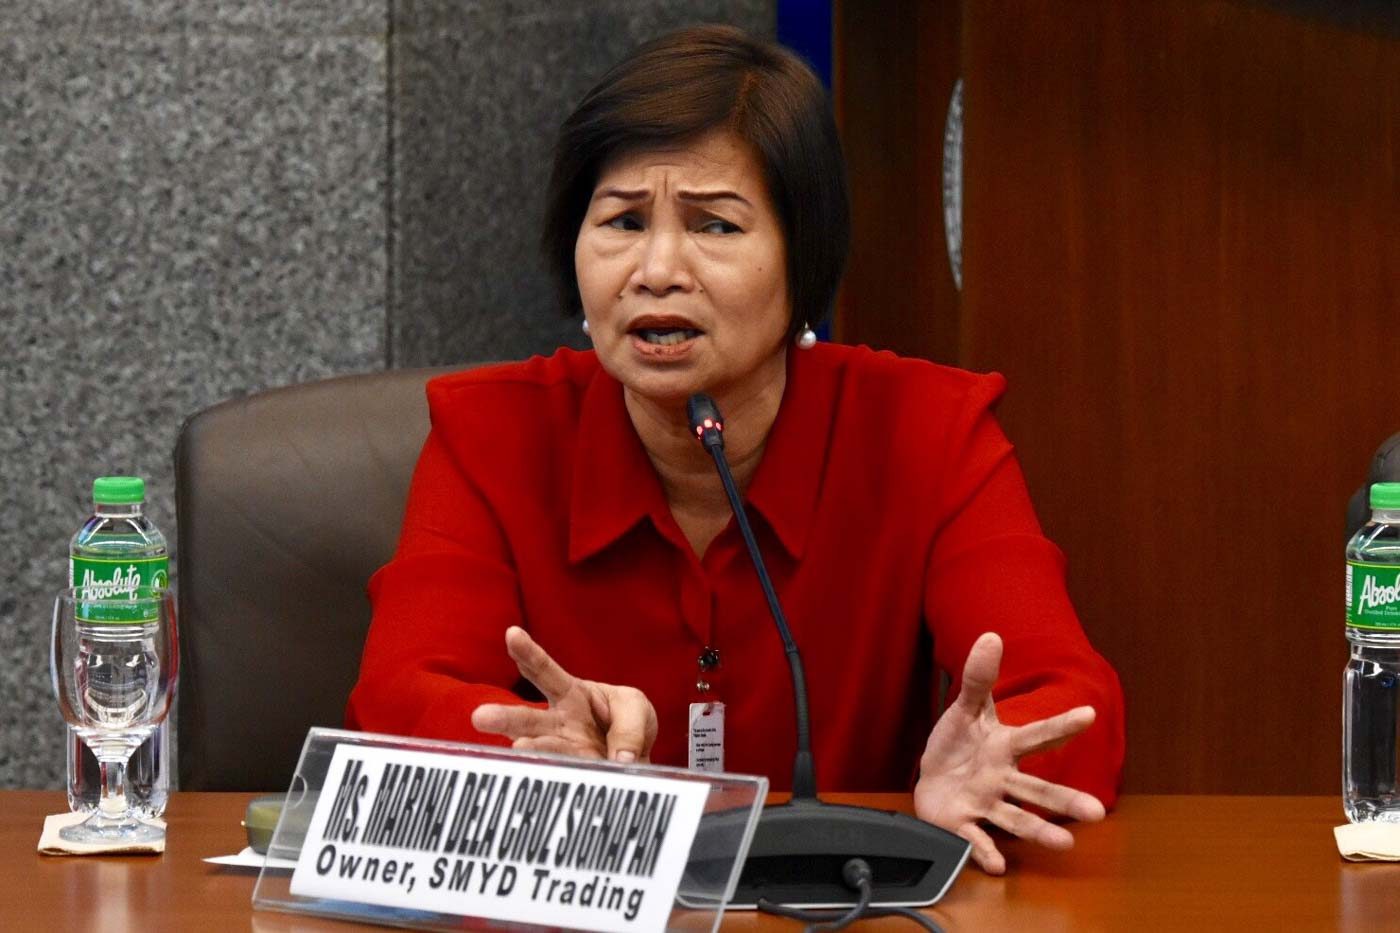 THREATS TO LIFE. Marina dela Cruz Signapan, owner of SMYD Trading, claims  threats to her life have made her feel ill, prompting her to skip a Senate hearing on shabu smuggling. File photo by Angie de Silva/Rappler  